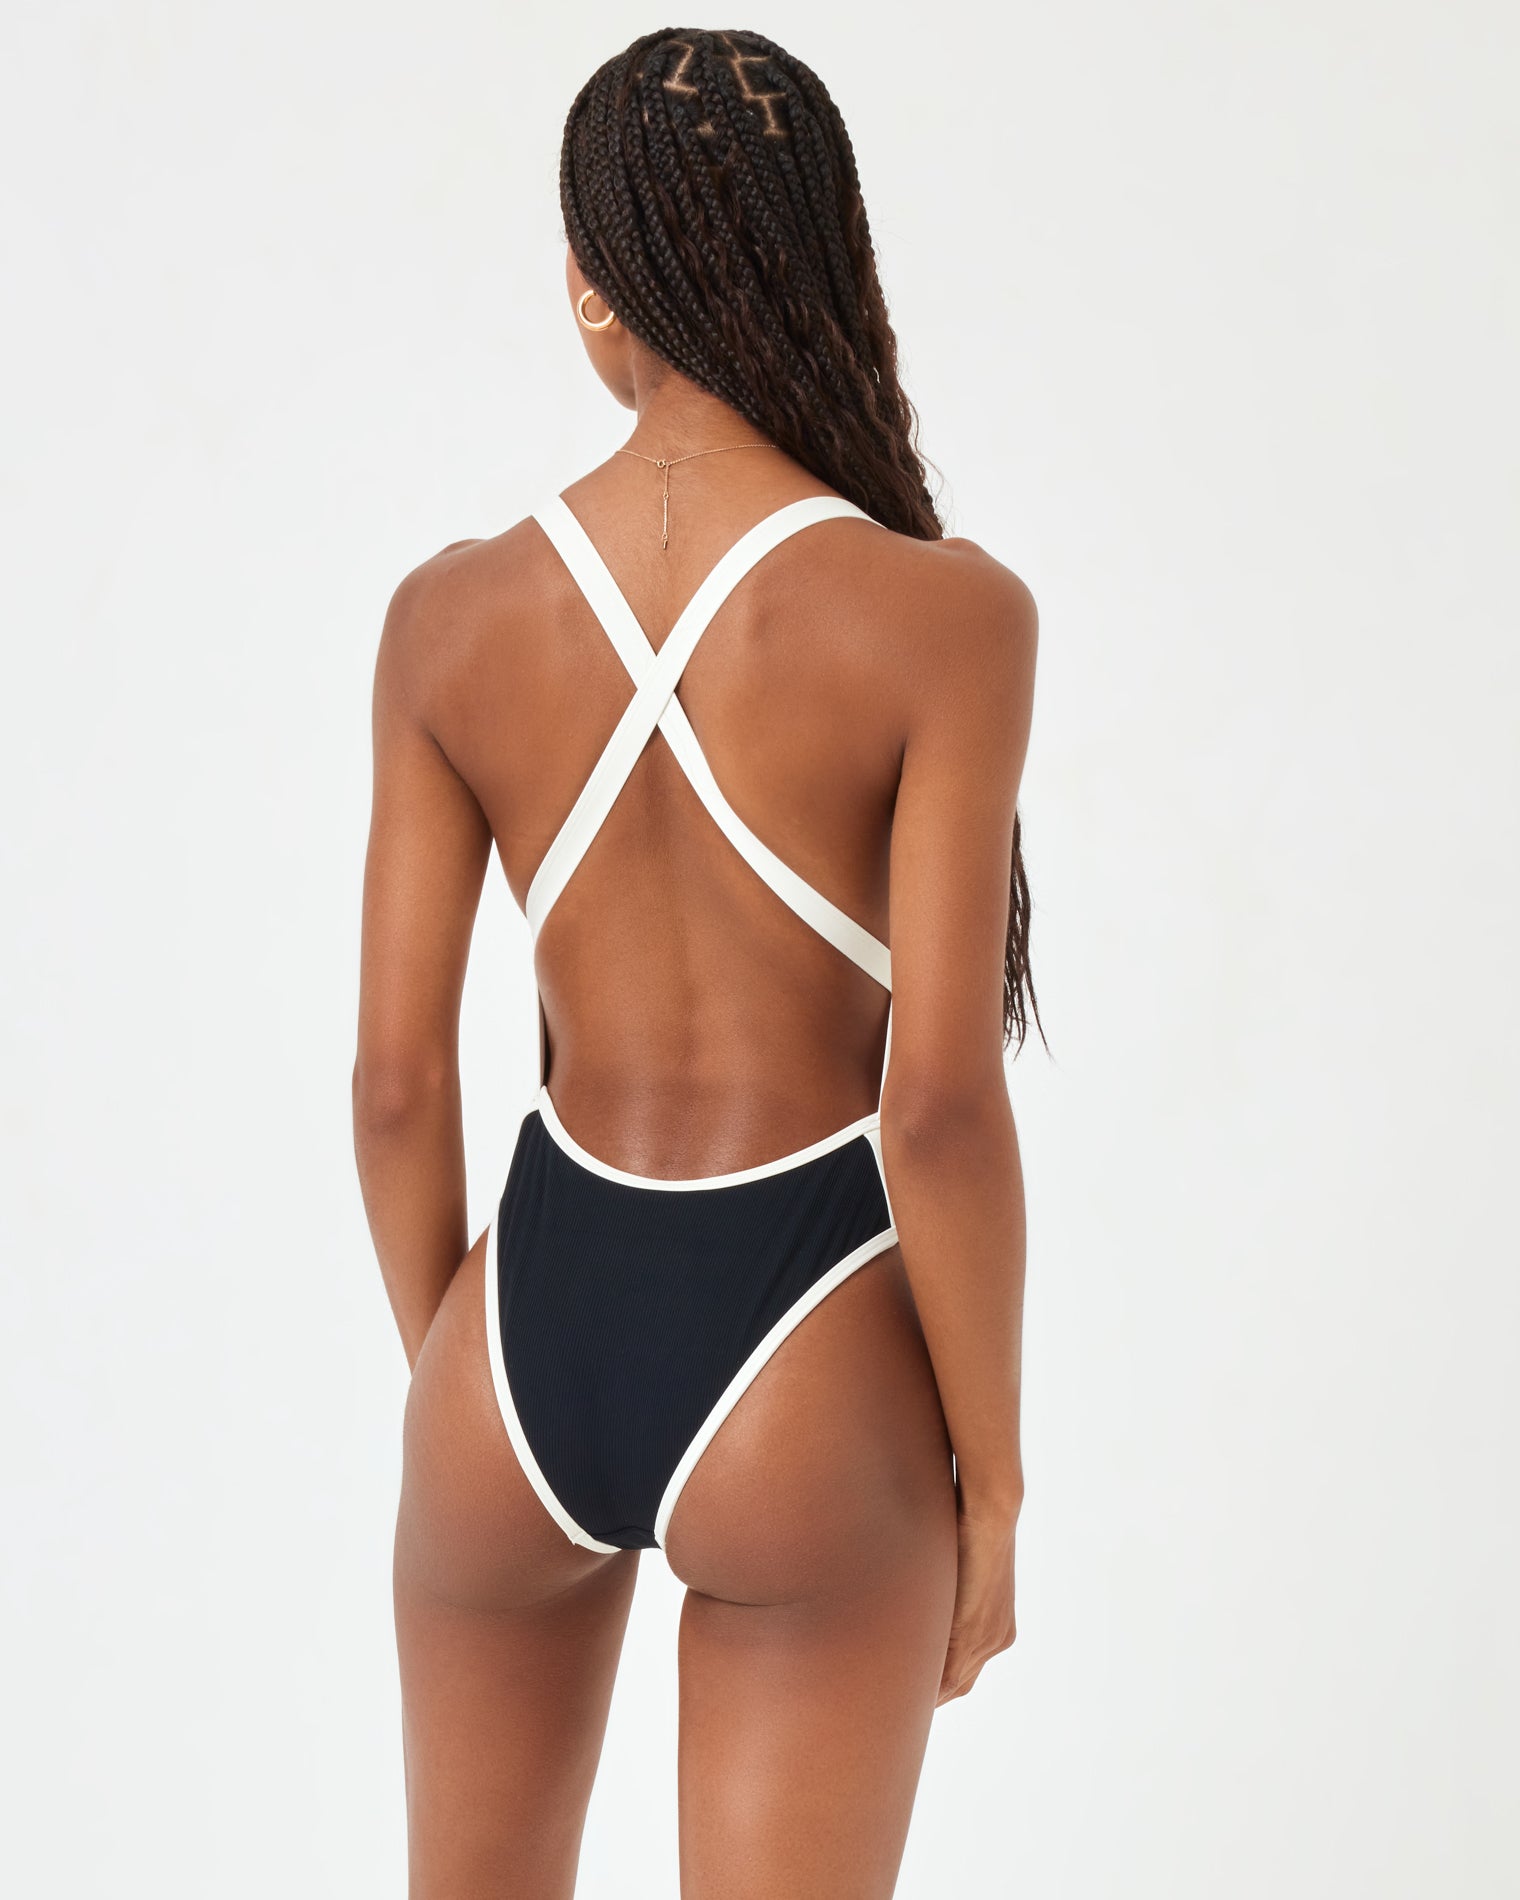 Ribbed Baewatch One Piece Swimsuit - Black-Cream Black | Model: Taelor (size: S)